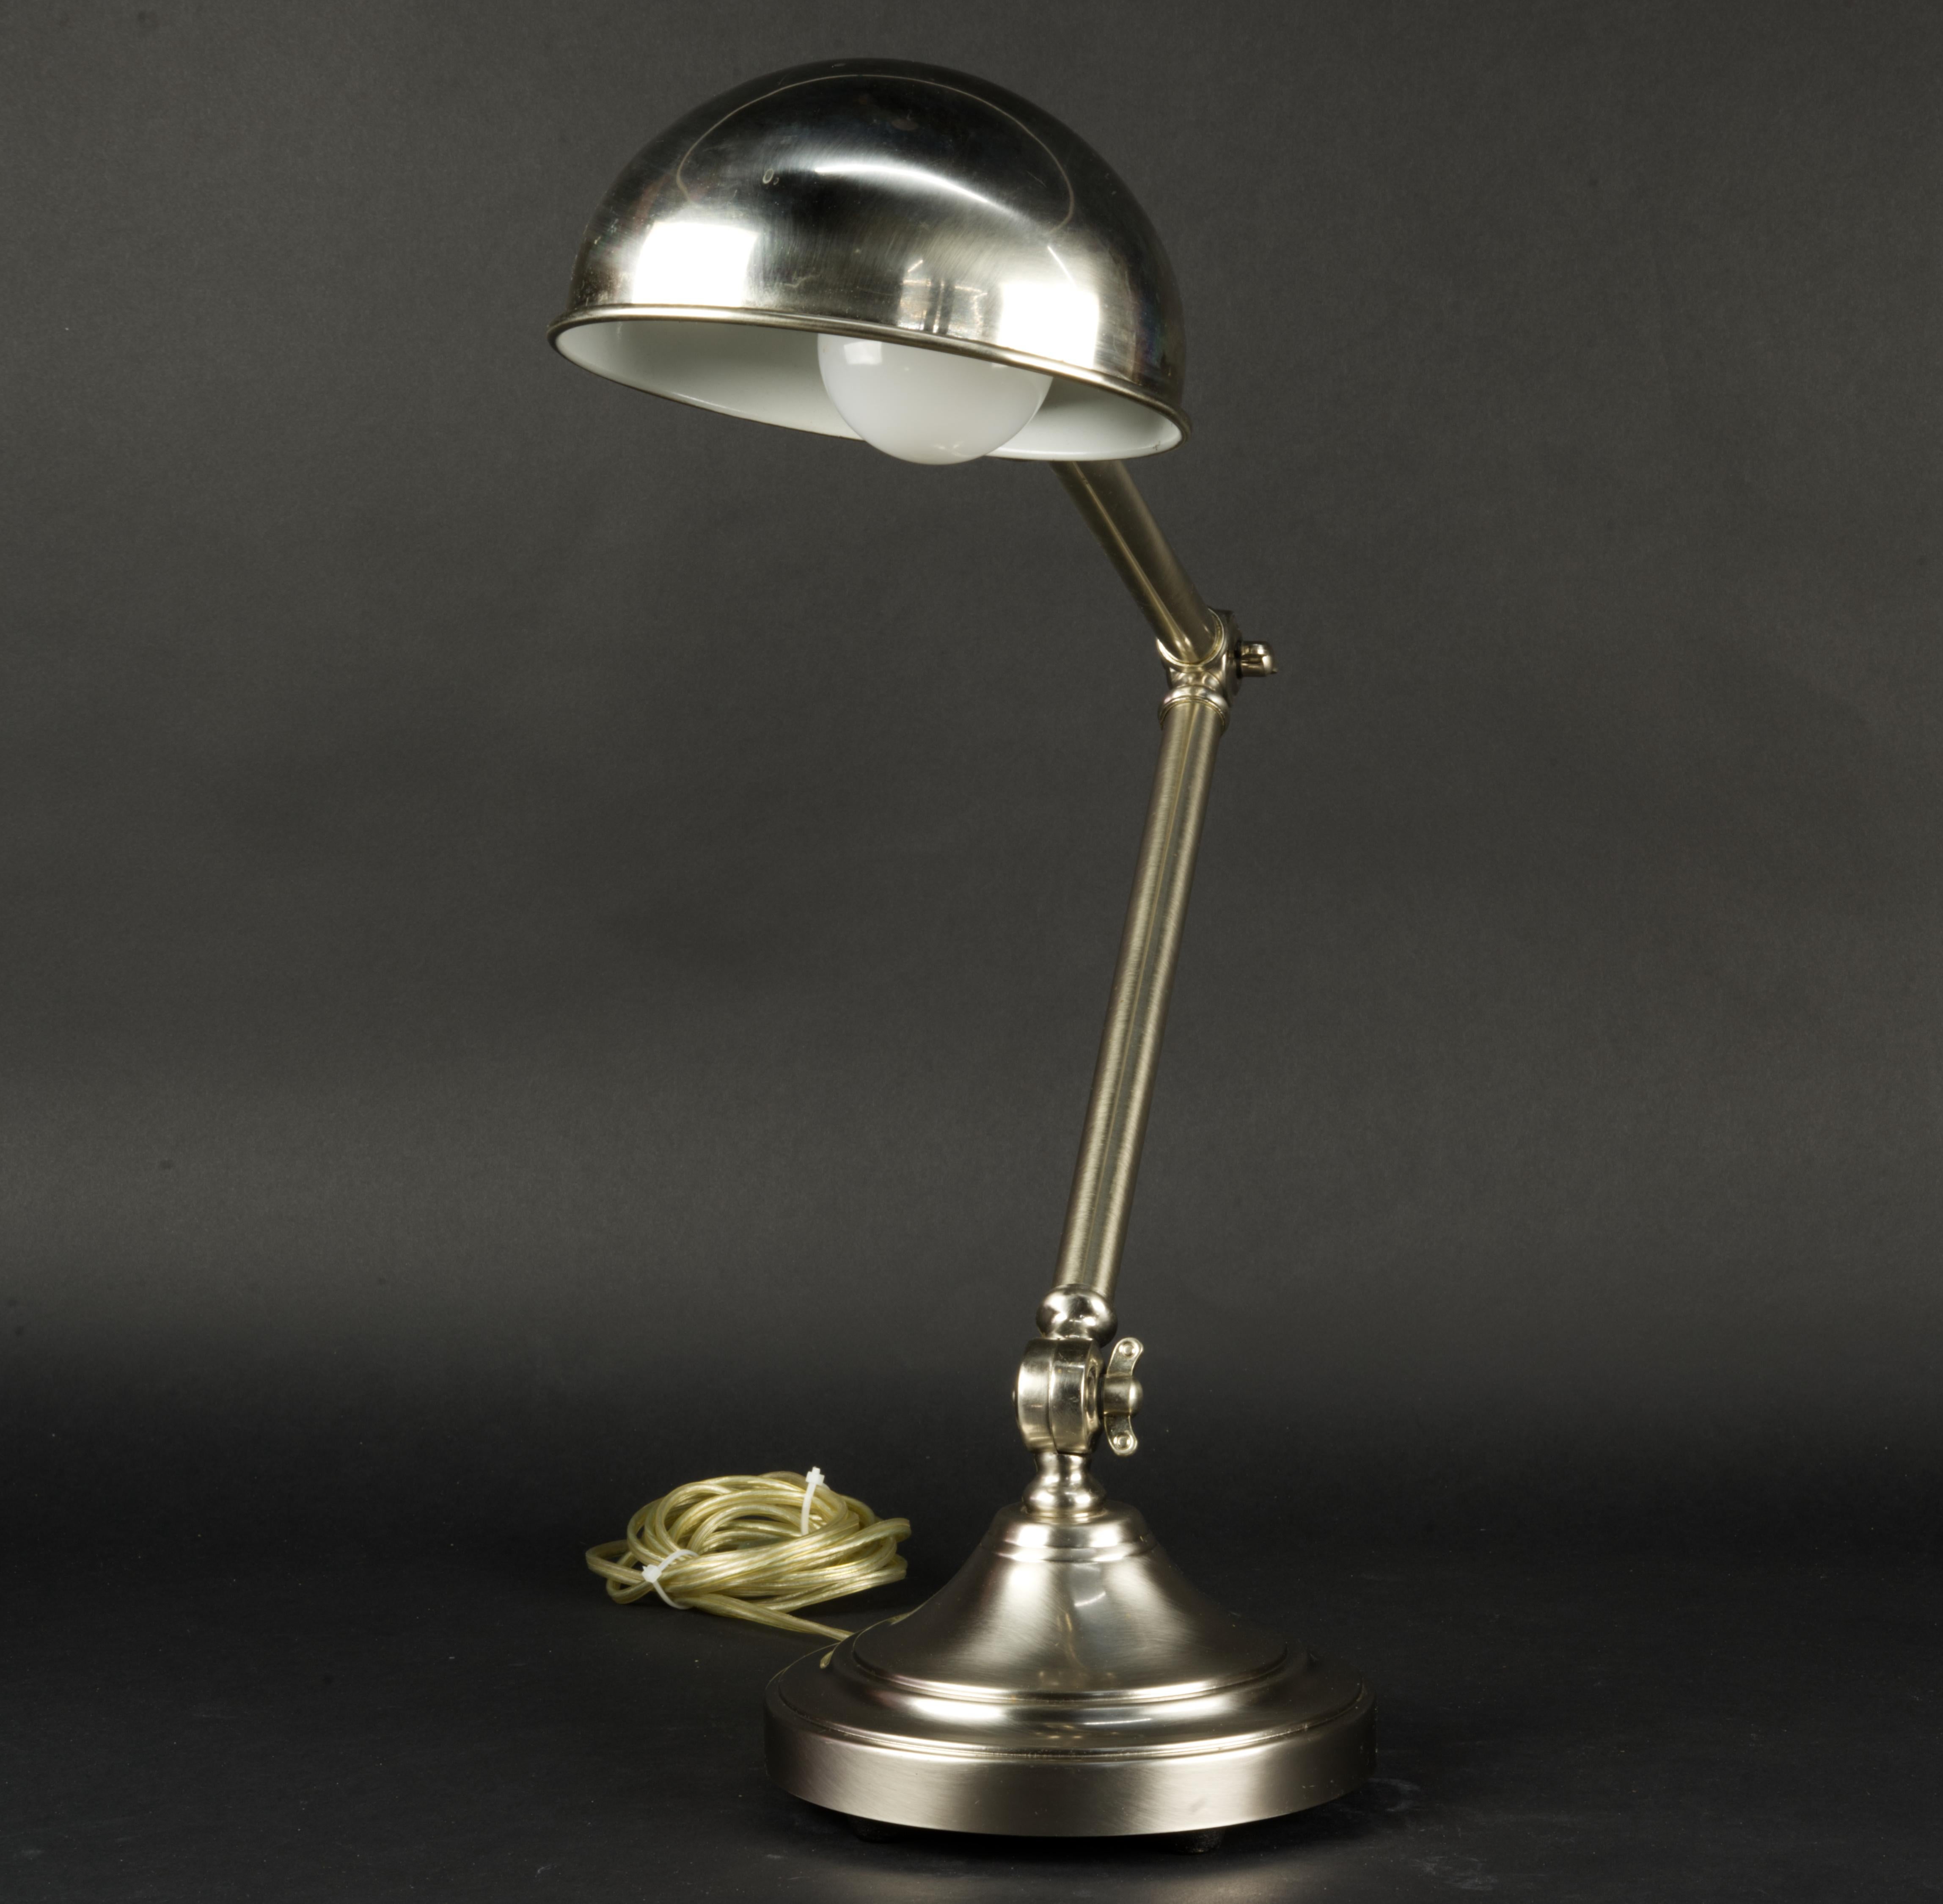  Kinetic Table Lamp by Robert Abbey in brushed chrome model #1500 In Good Condition For Sale In Clifton Springs, NY